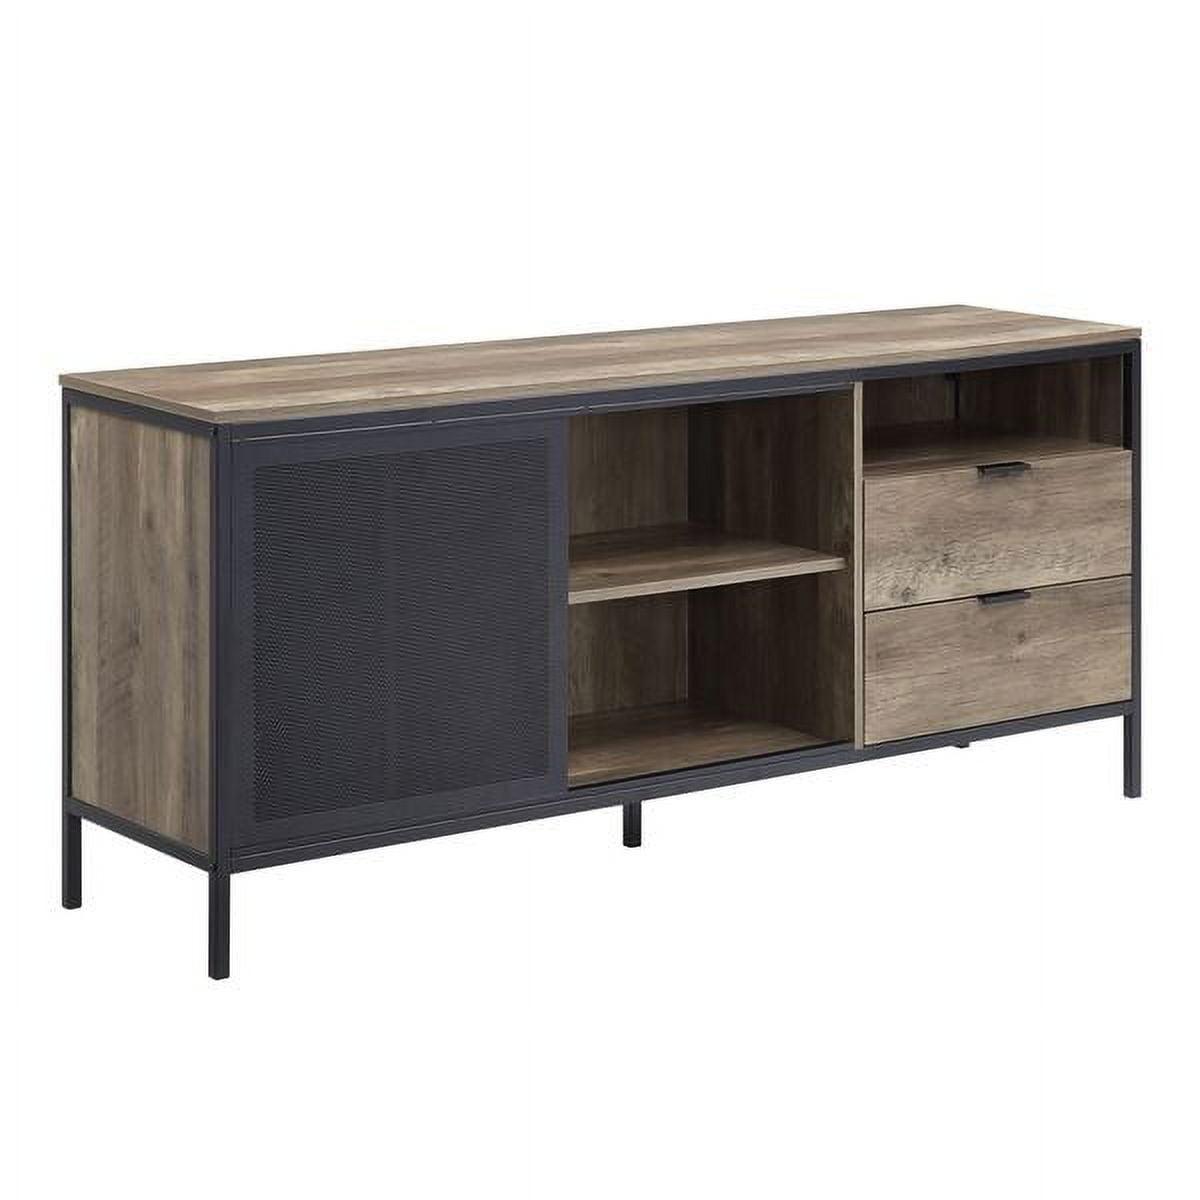 Rustic Oak & Black Industrial 63" TV Stand with Storage